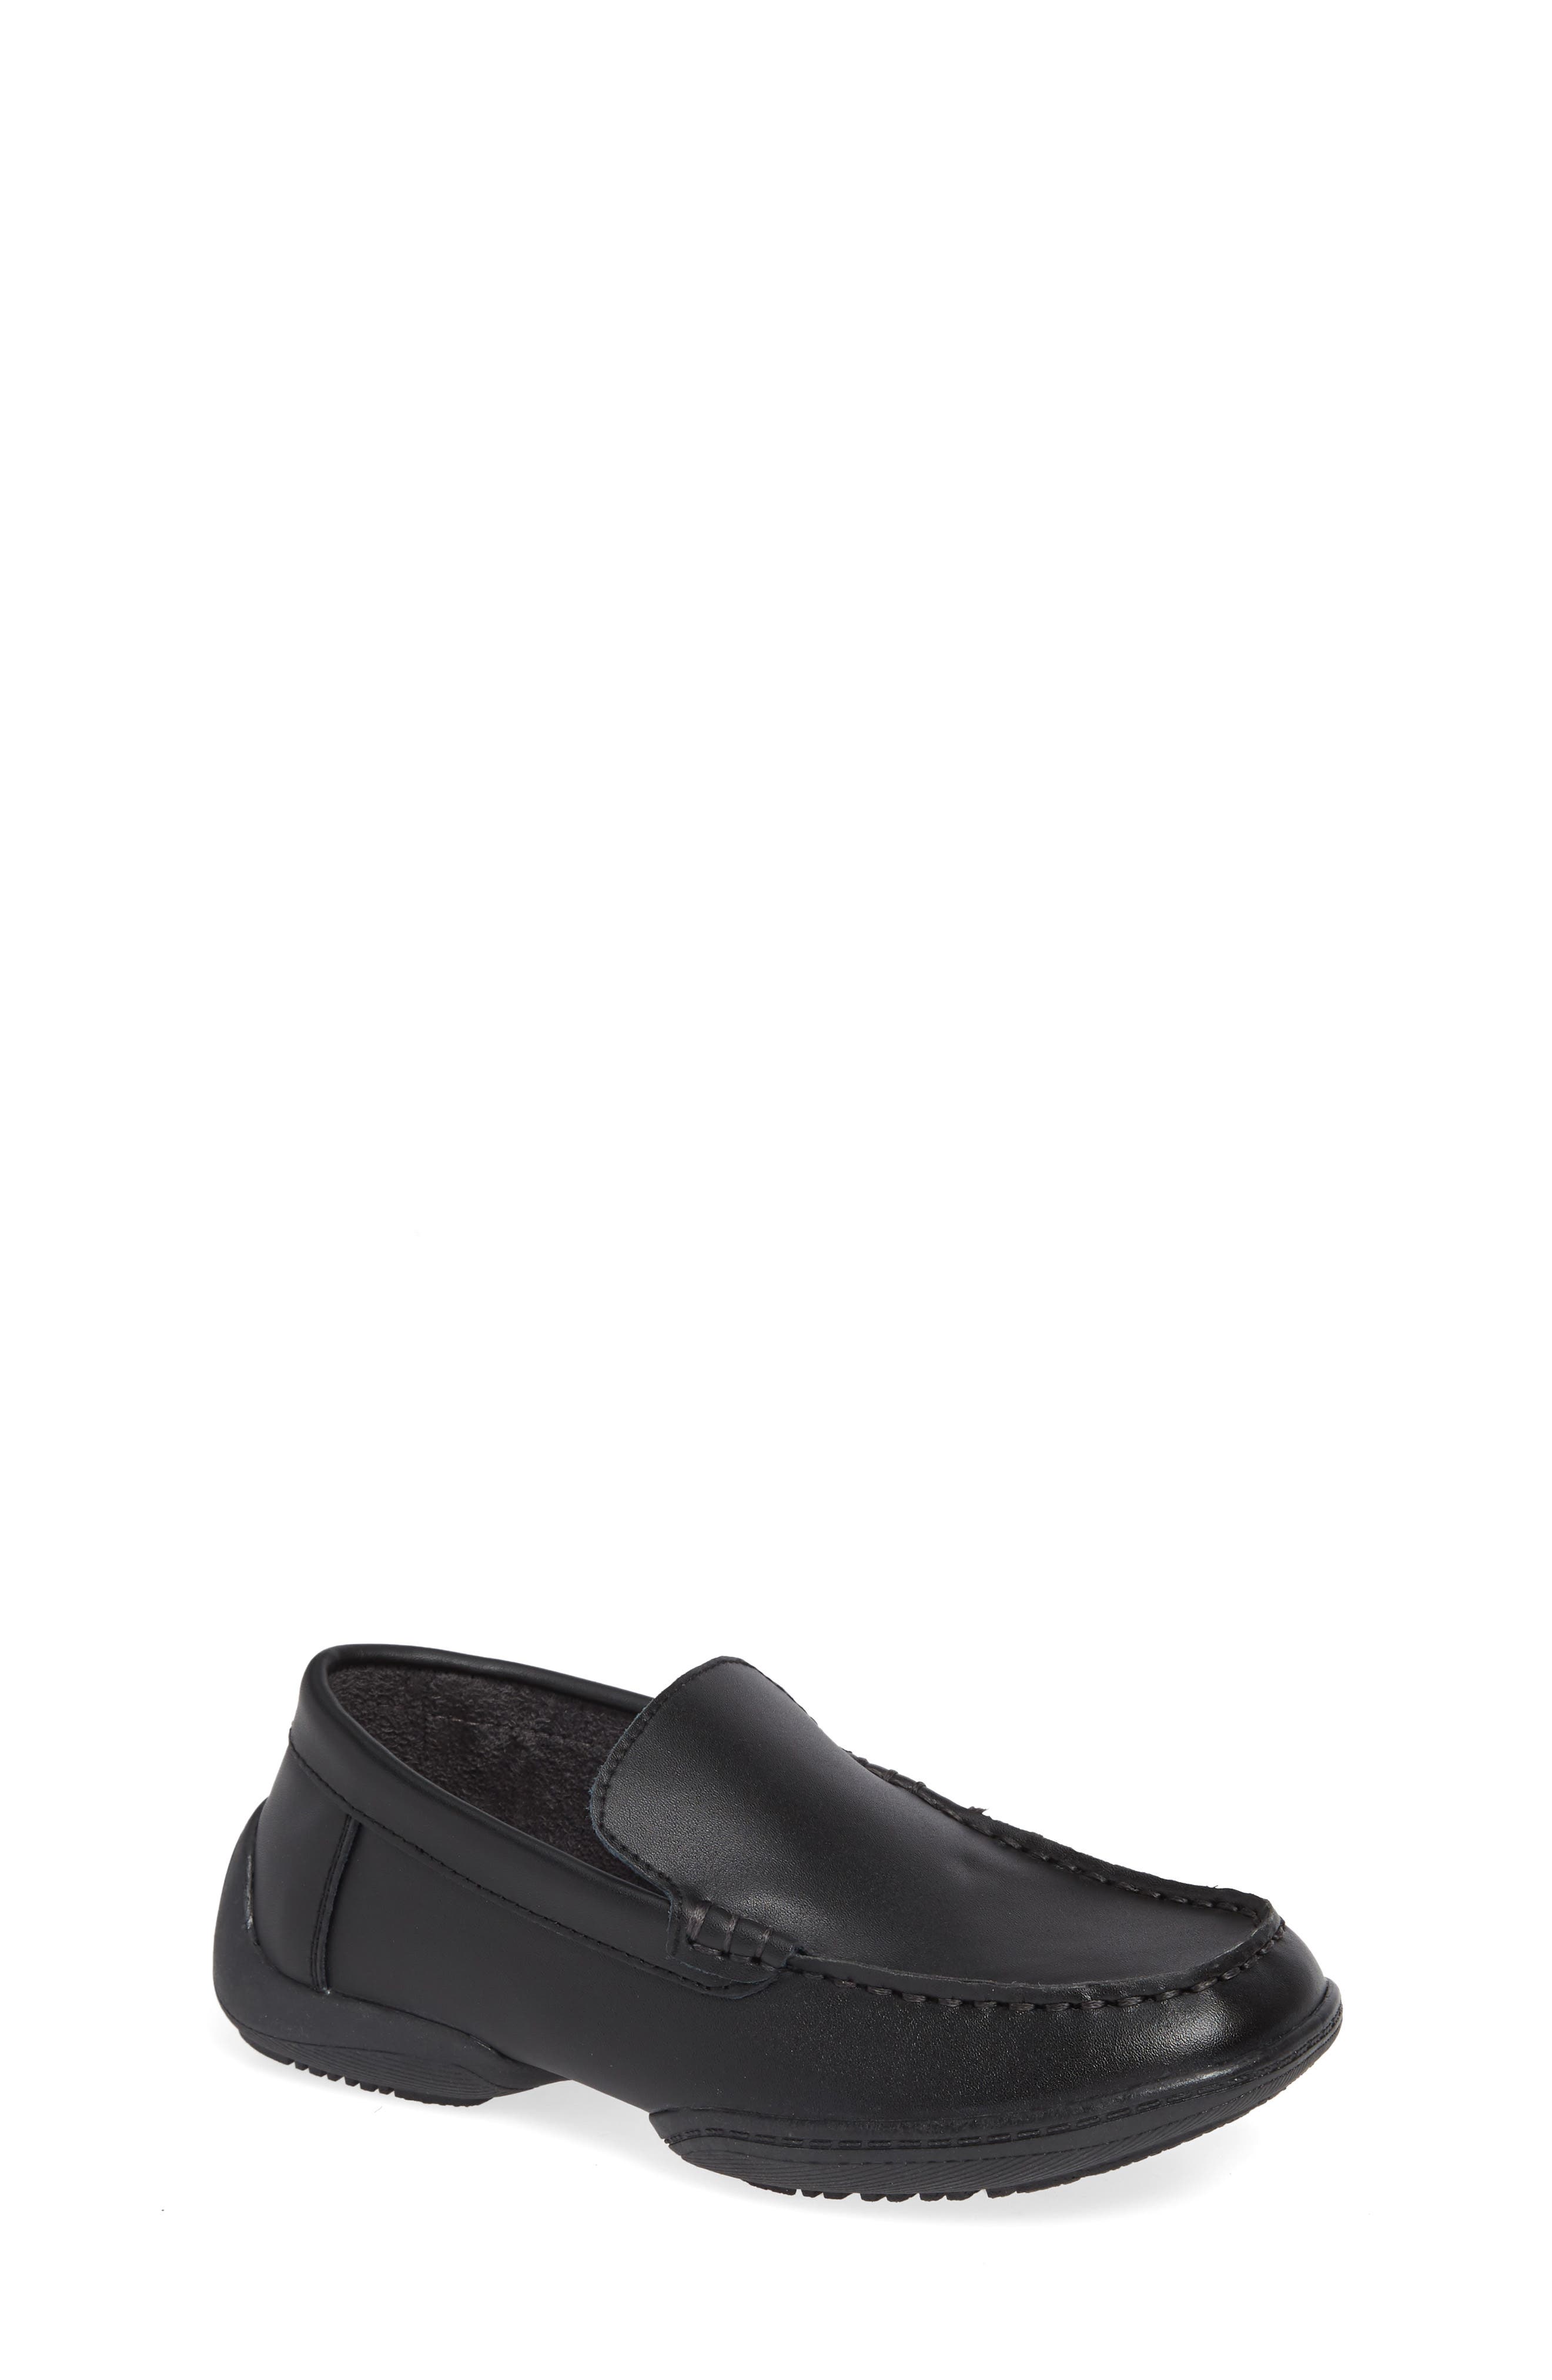 Baby Reaction Kenneth Cole \u0026 Kids Shoes 